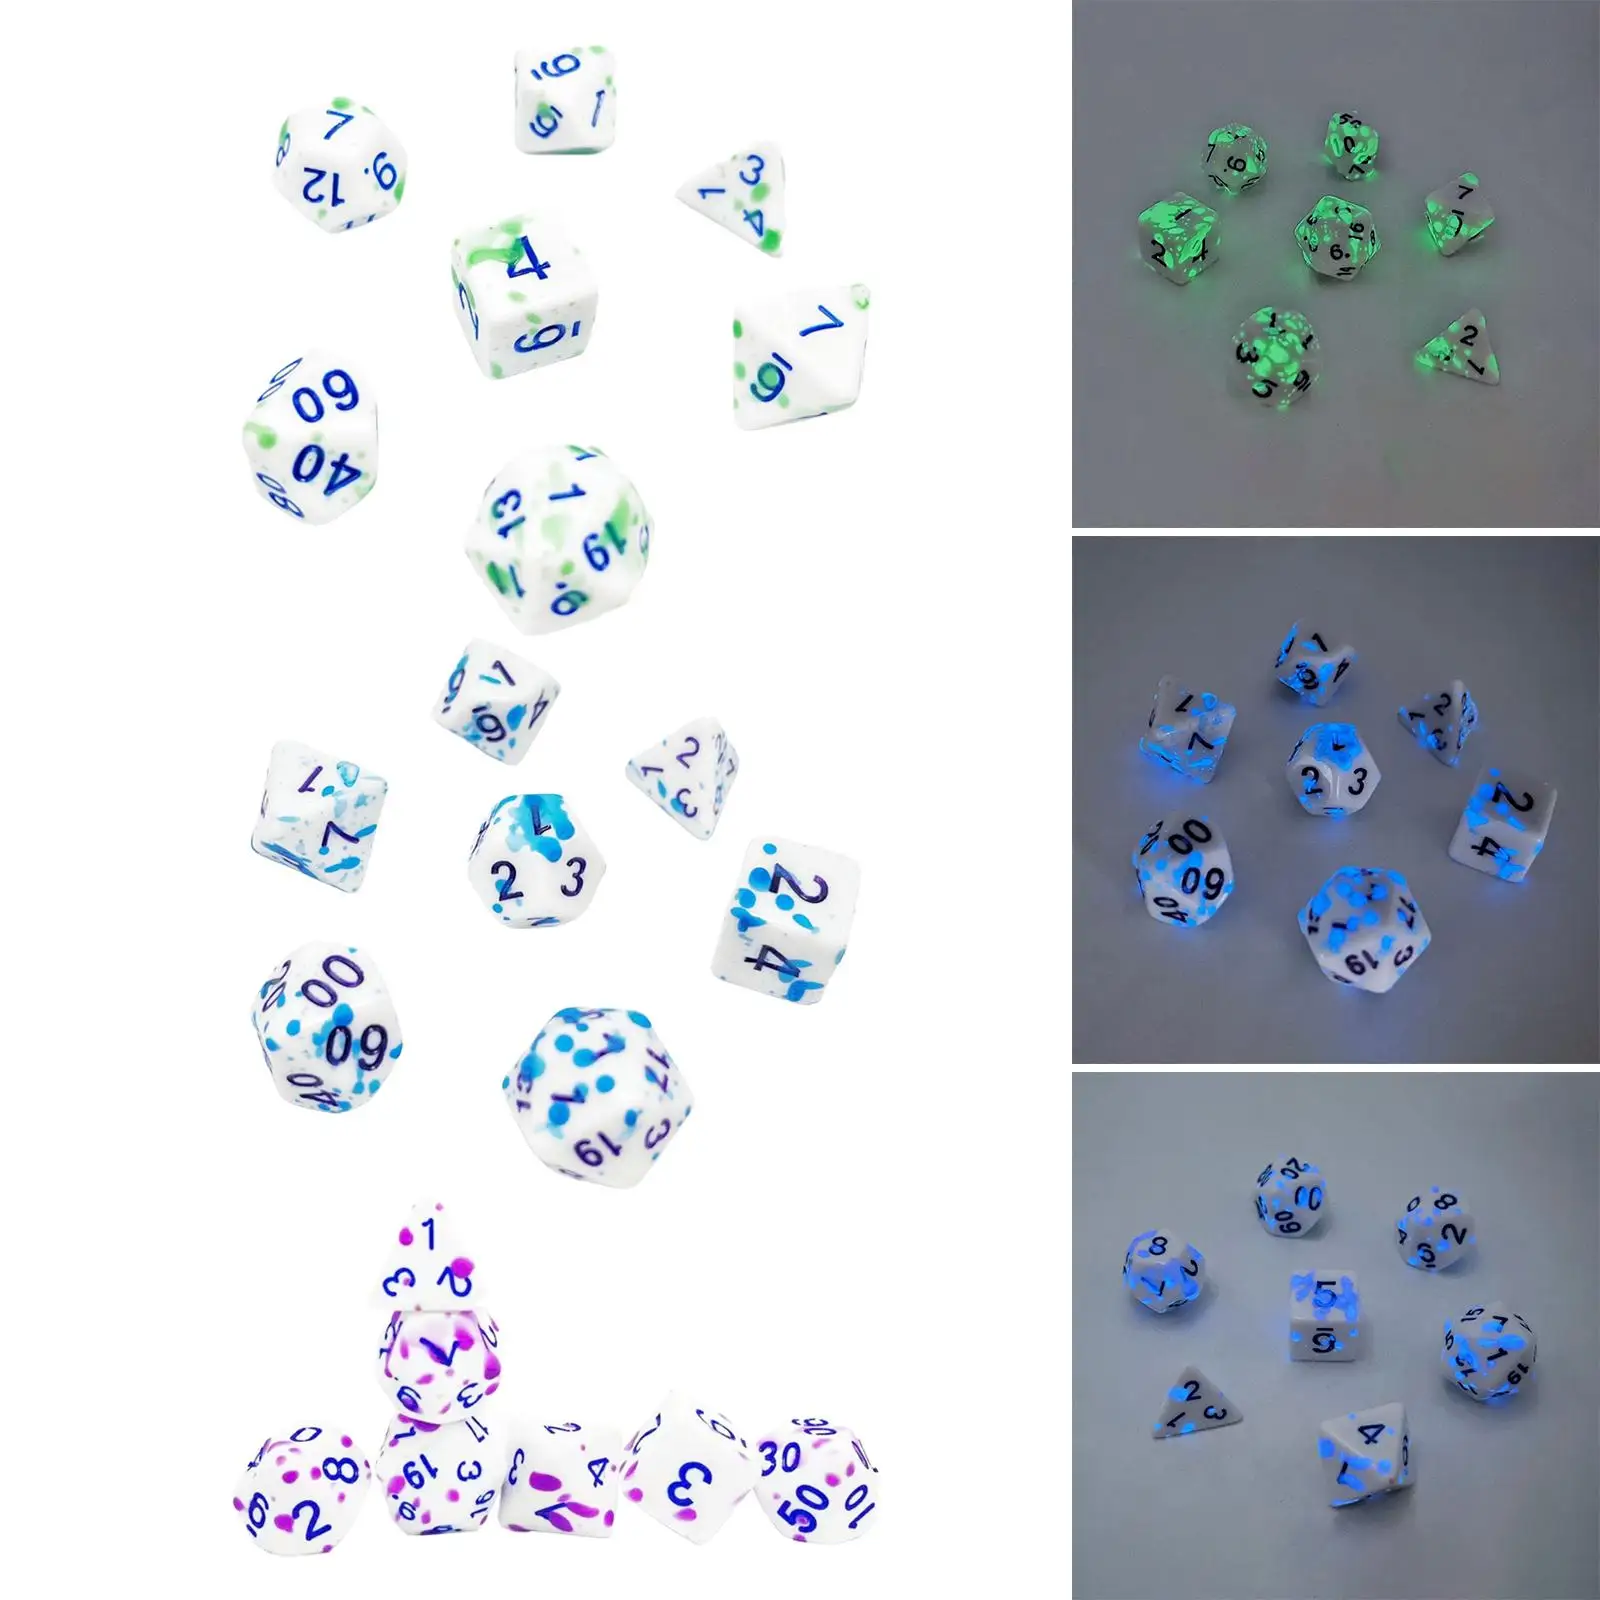 7 Pieces Multisided Dice Party Accessories Handmade Board Game Family Gatherings Role Playing Polyhedral Dice Table Gaming Dice